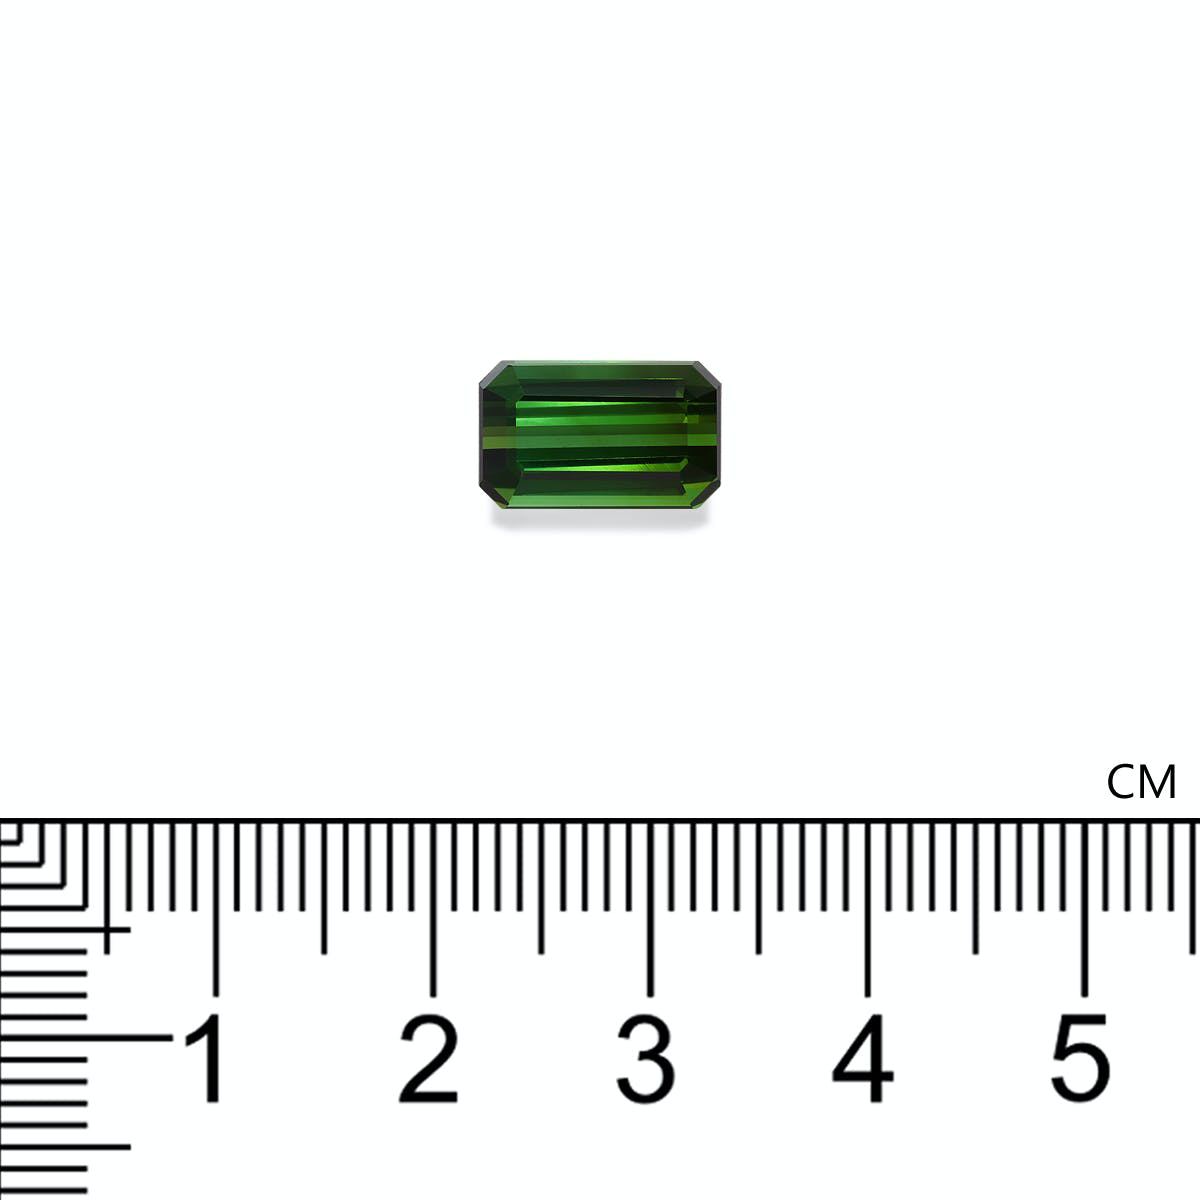 Picture of Basil Green Tourmaline 4.42ct (TG1385)